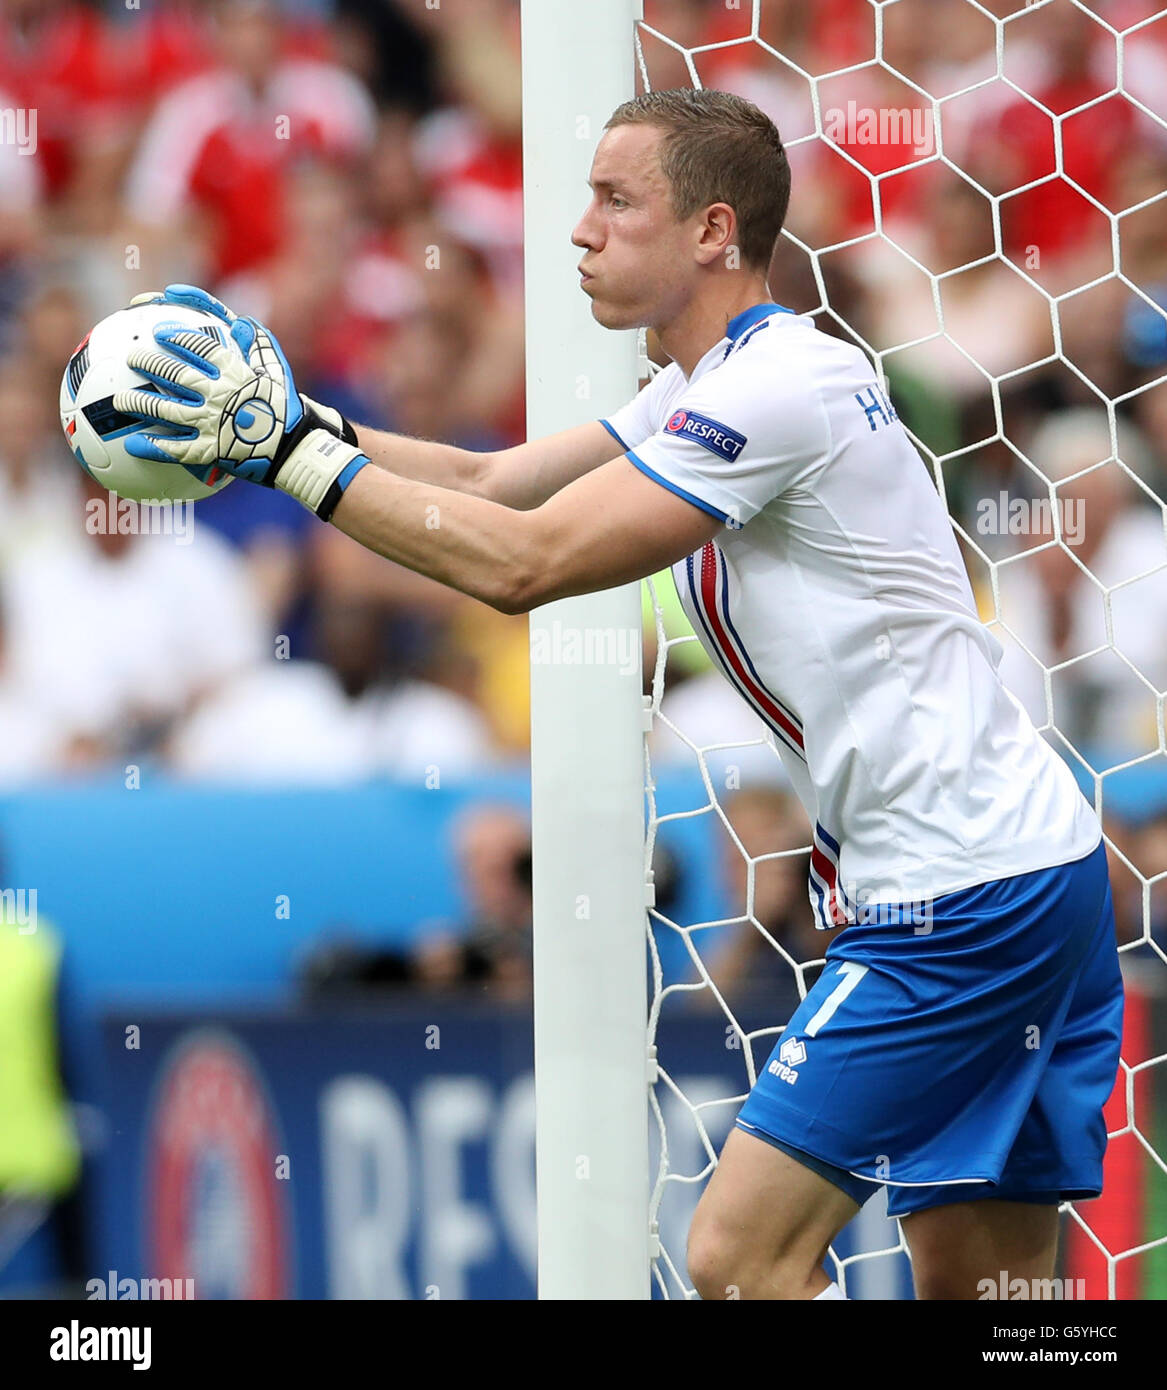 Iceland goalkeeper Hannes Thor Halldorsson during the Euro 2016, Group F match at the Stade de France, Paris. PRESS ASSOCIATION Photo. Picture date: Wednesday June 22, 2016. See PA story SOCCER Iceland. Photo credit should read: Owen Humphreys/PA Wire. RESTRICTIONS: Use subject to restrictions. Editorial use only. Book and magazine sales permitted providing not solely devoted to any one team/player/match. No commercial use. Call +44 (0)1158 447447 for further information. Stock Photo